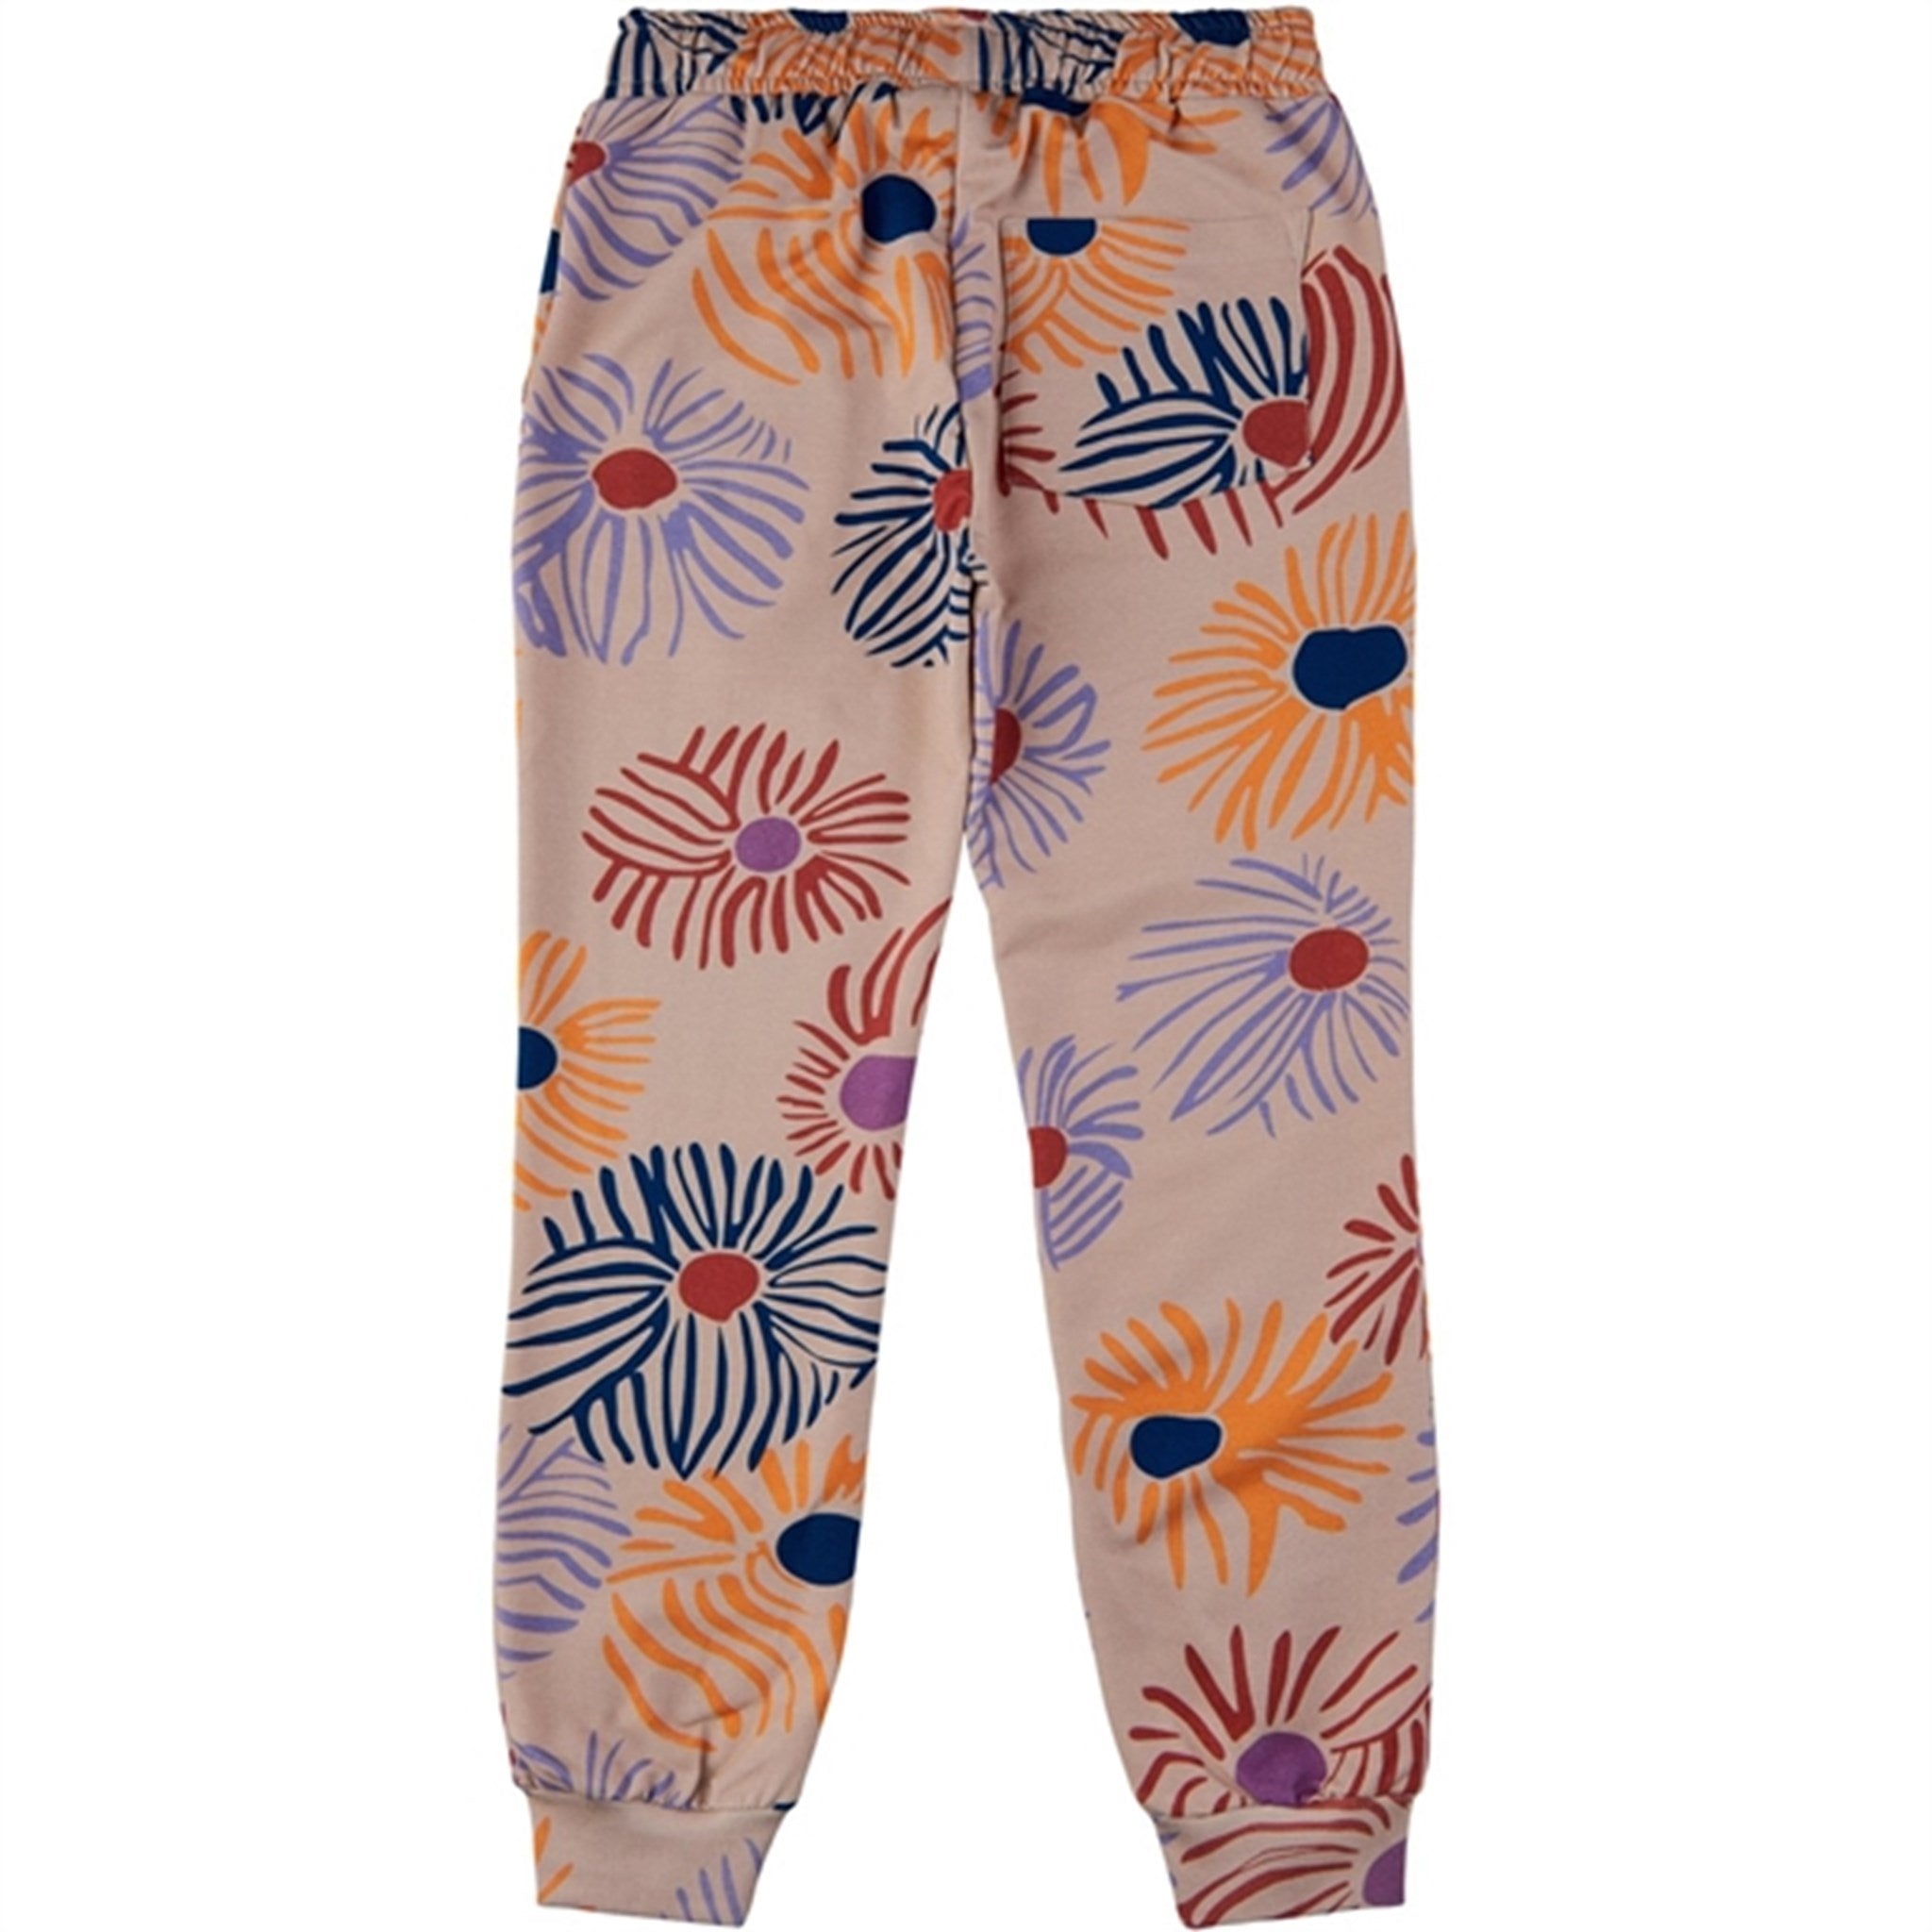 Soft Gallery Cameo Rose Charline Cupflower Sweatpants 2